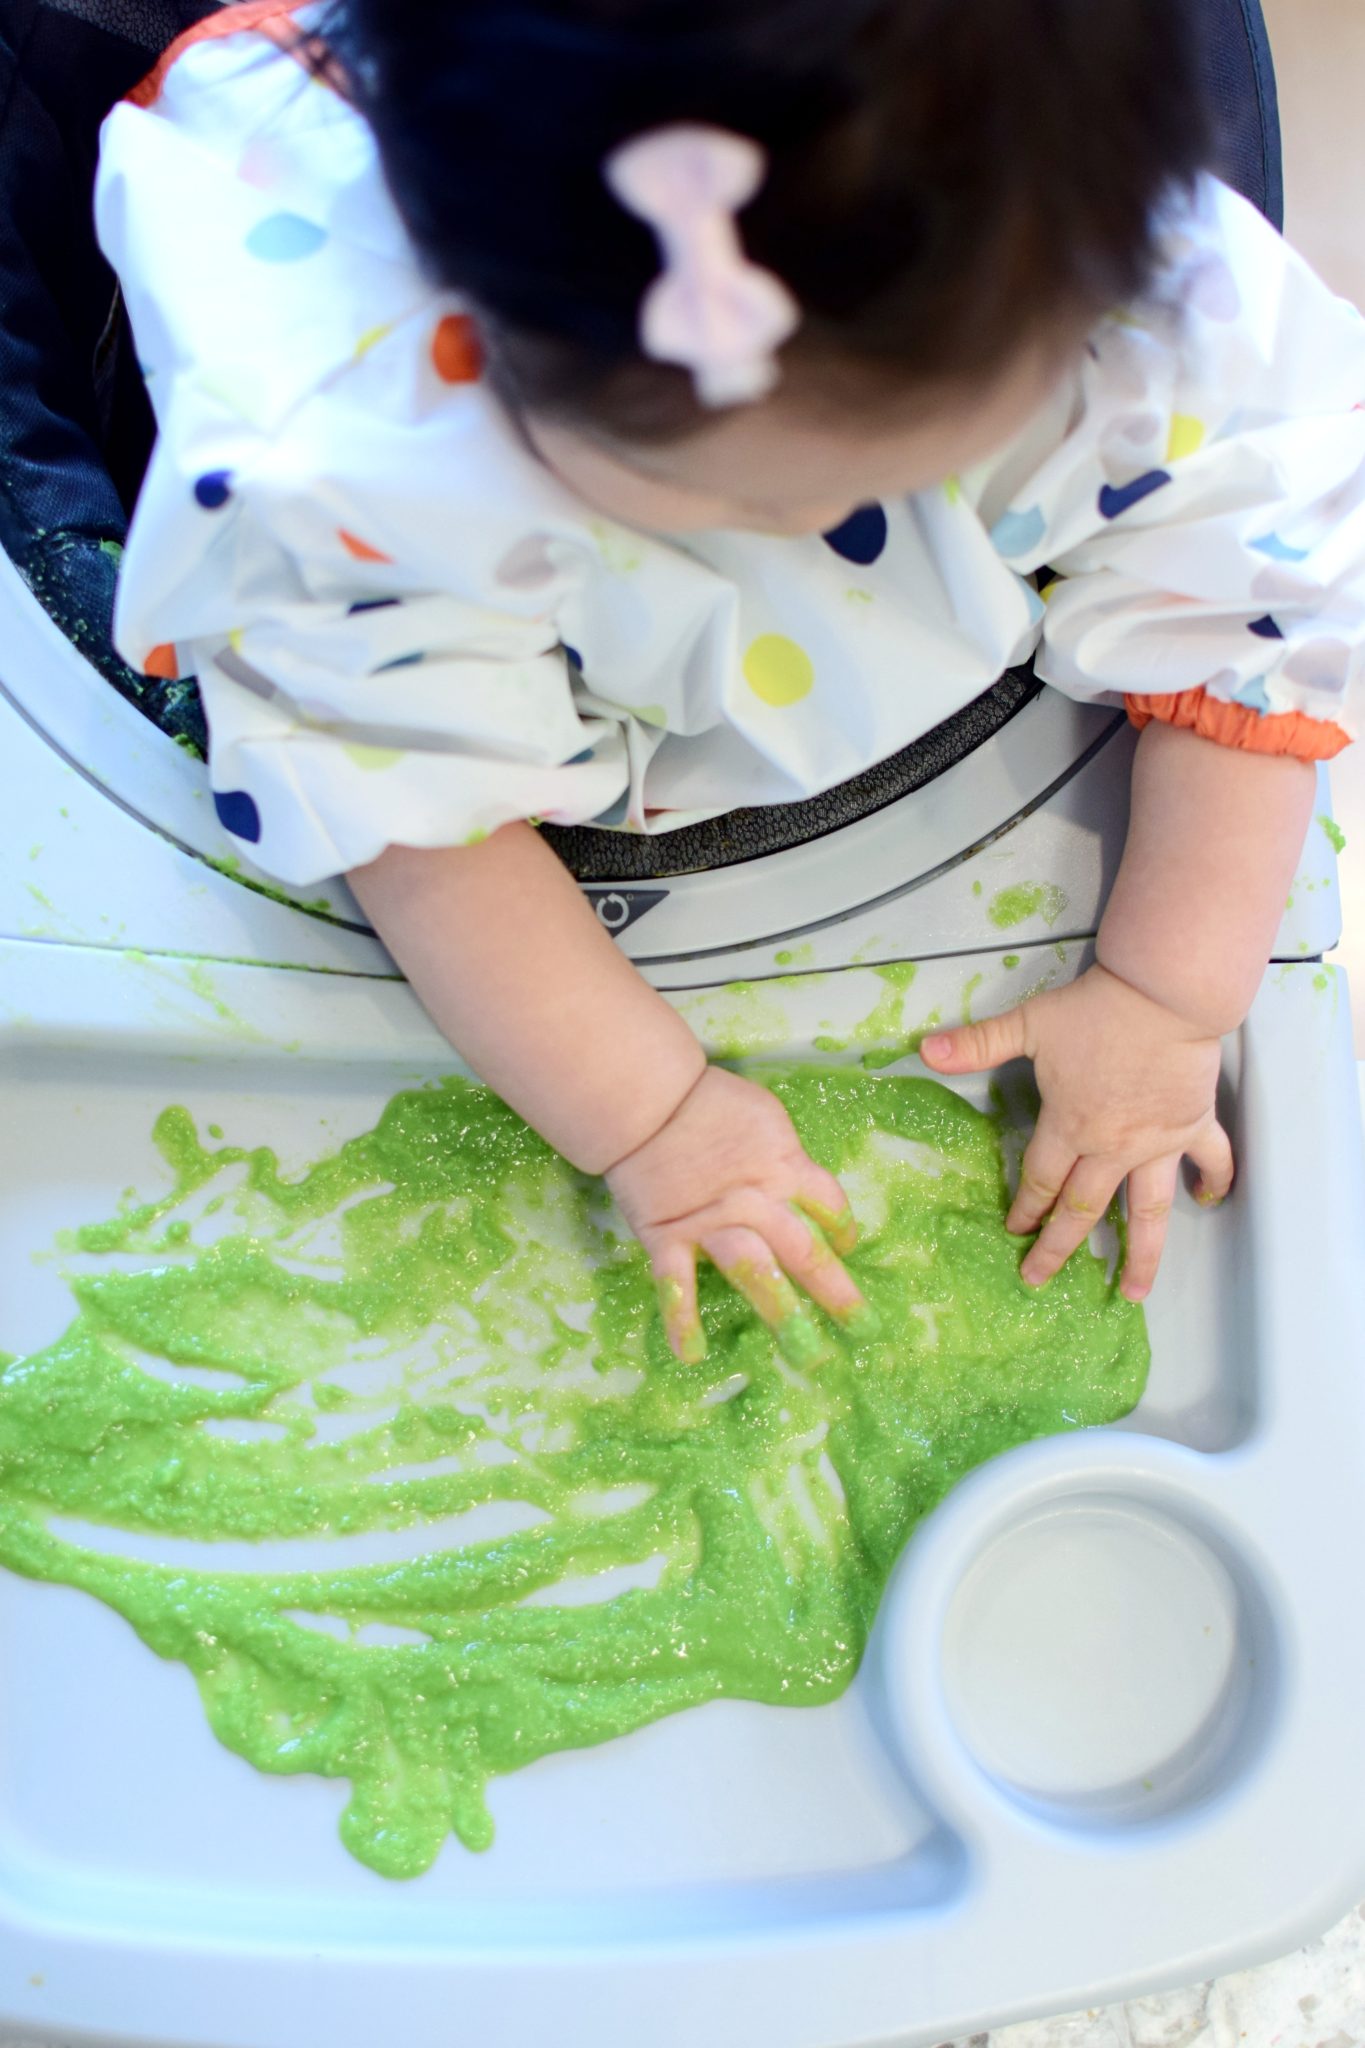 Non-Toxic Homemade Finger Paint Recipe for Toddlers • Kids